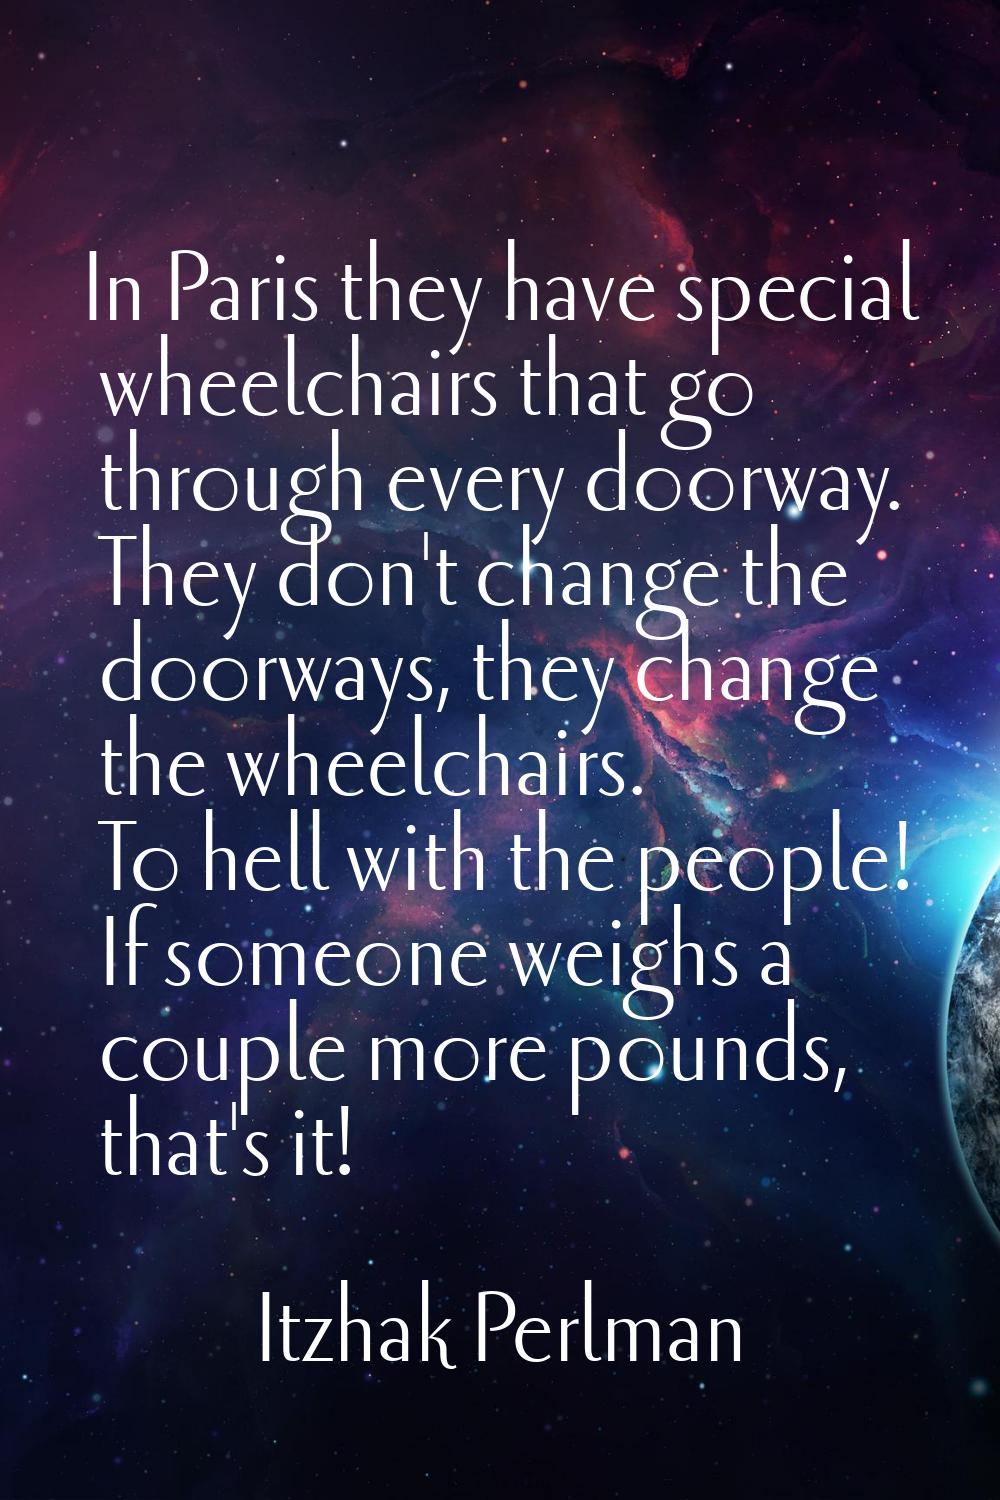 In Paris they have special wheelchairs that go through every doorway. They don't change the doorway